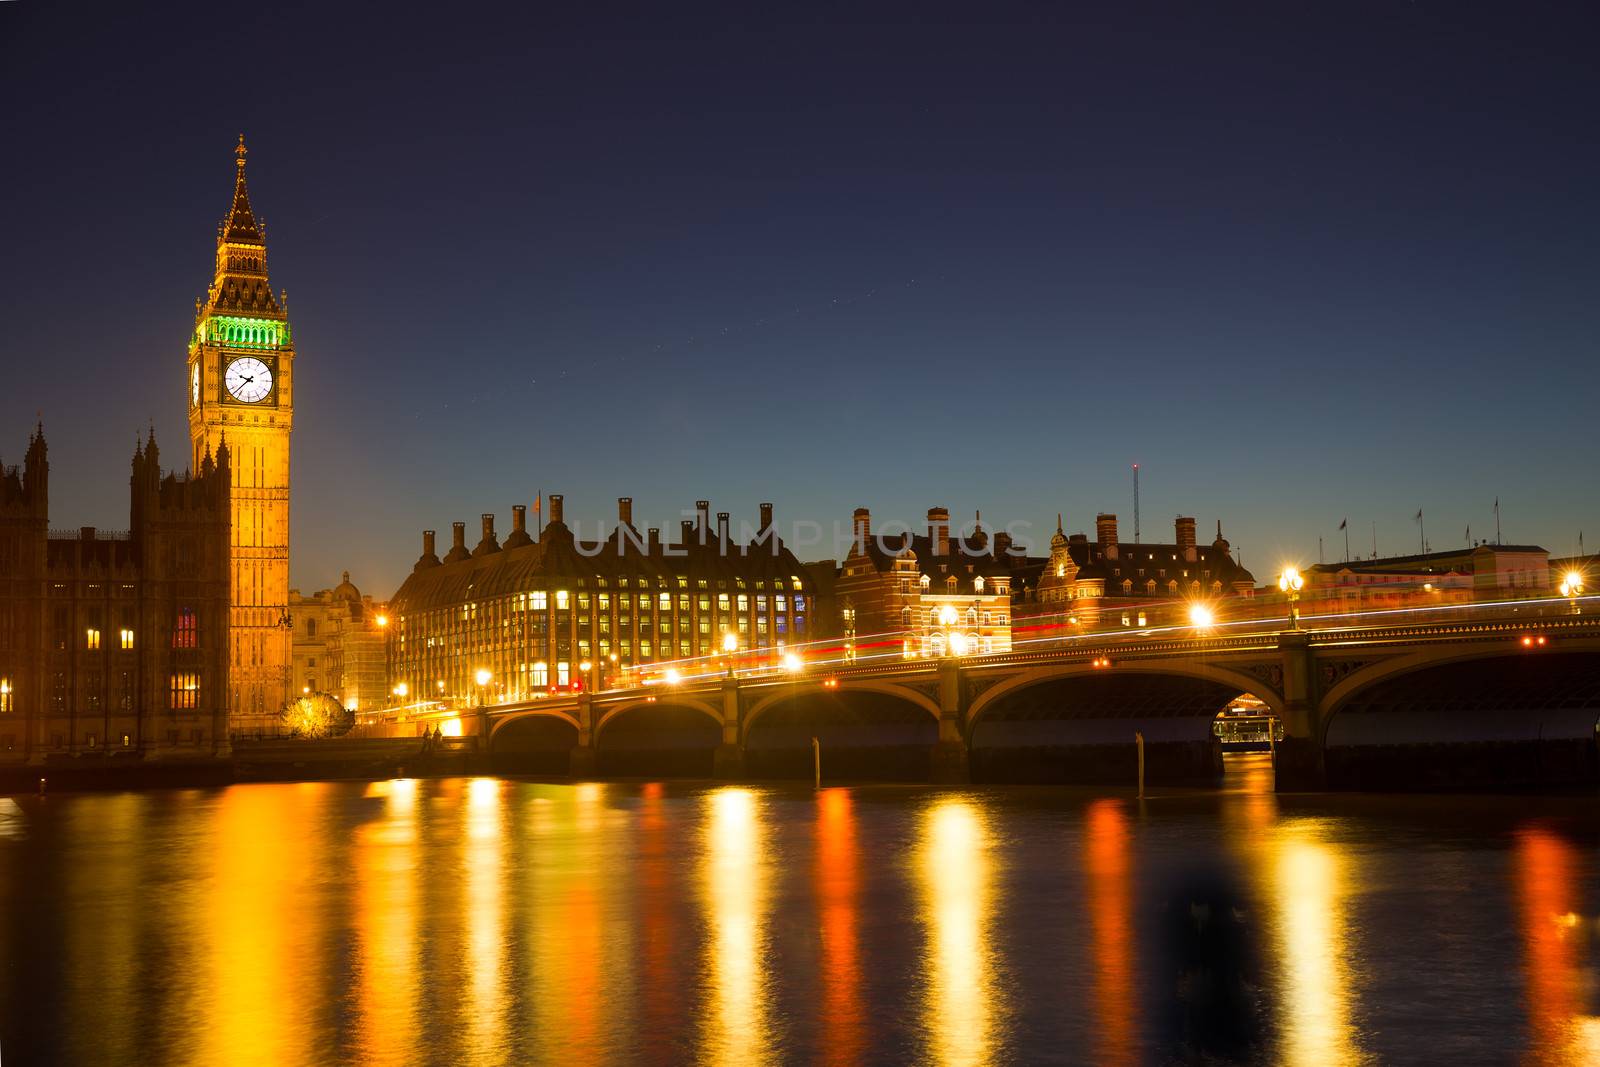 Reflection of Westminster Bridge and the Elizabeth Tower (Big Ben) of the Palace of Westminster in the River Thames